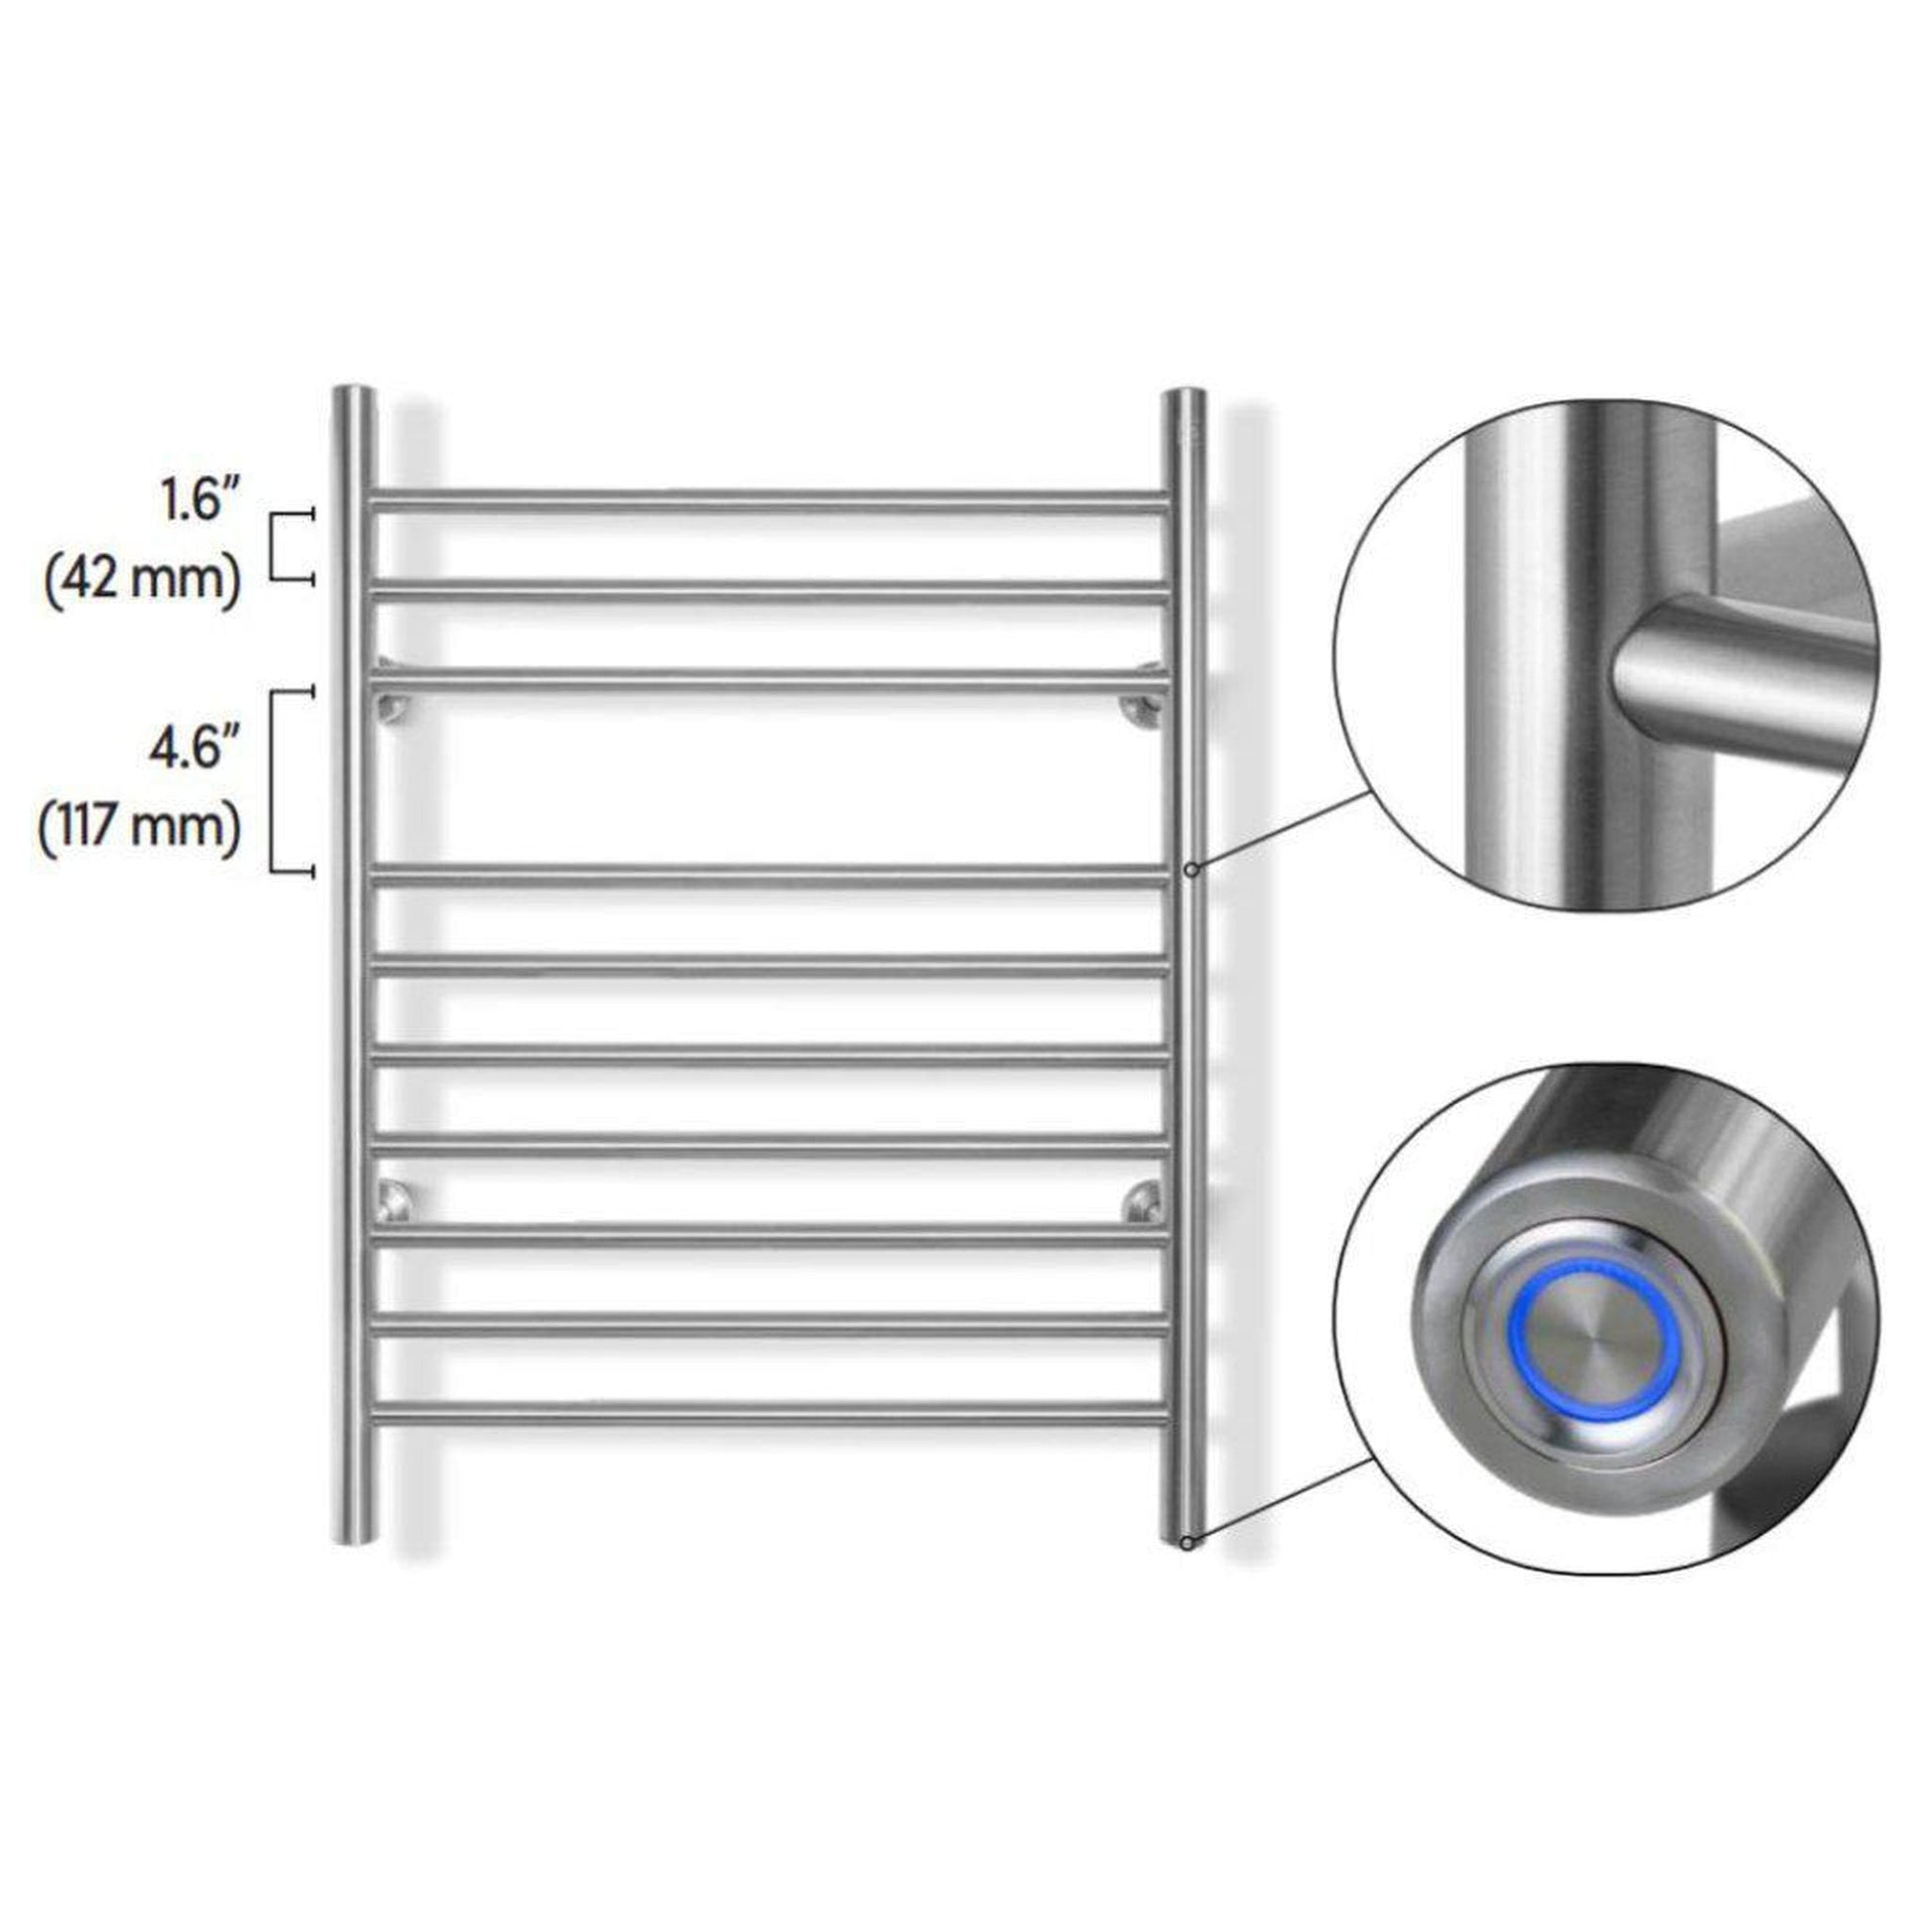 WarmlyYours Infinity 24" x 32" Brushed Stainless Steel Wall-Mounted 10-Bar Dual Connection Hardwired or Plug-In Towel Warmer